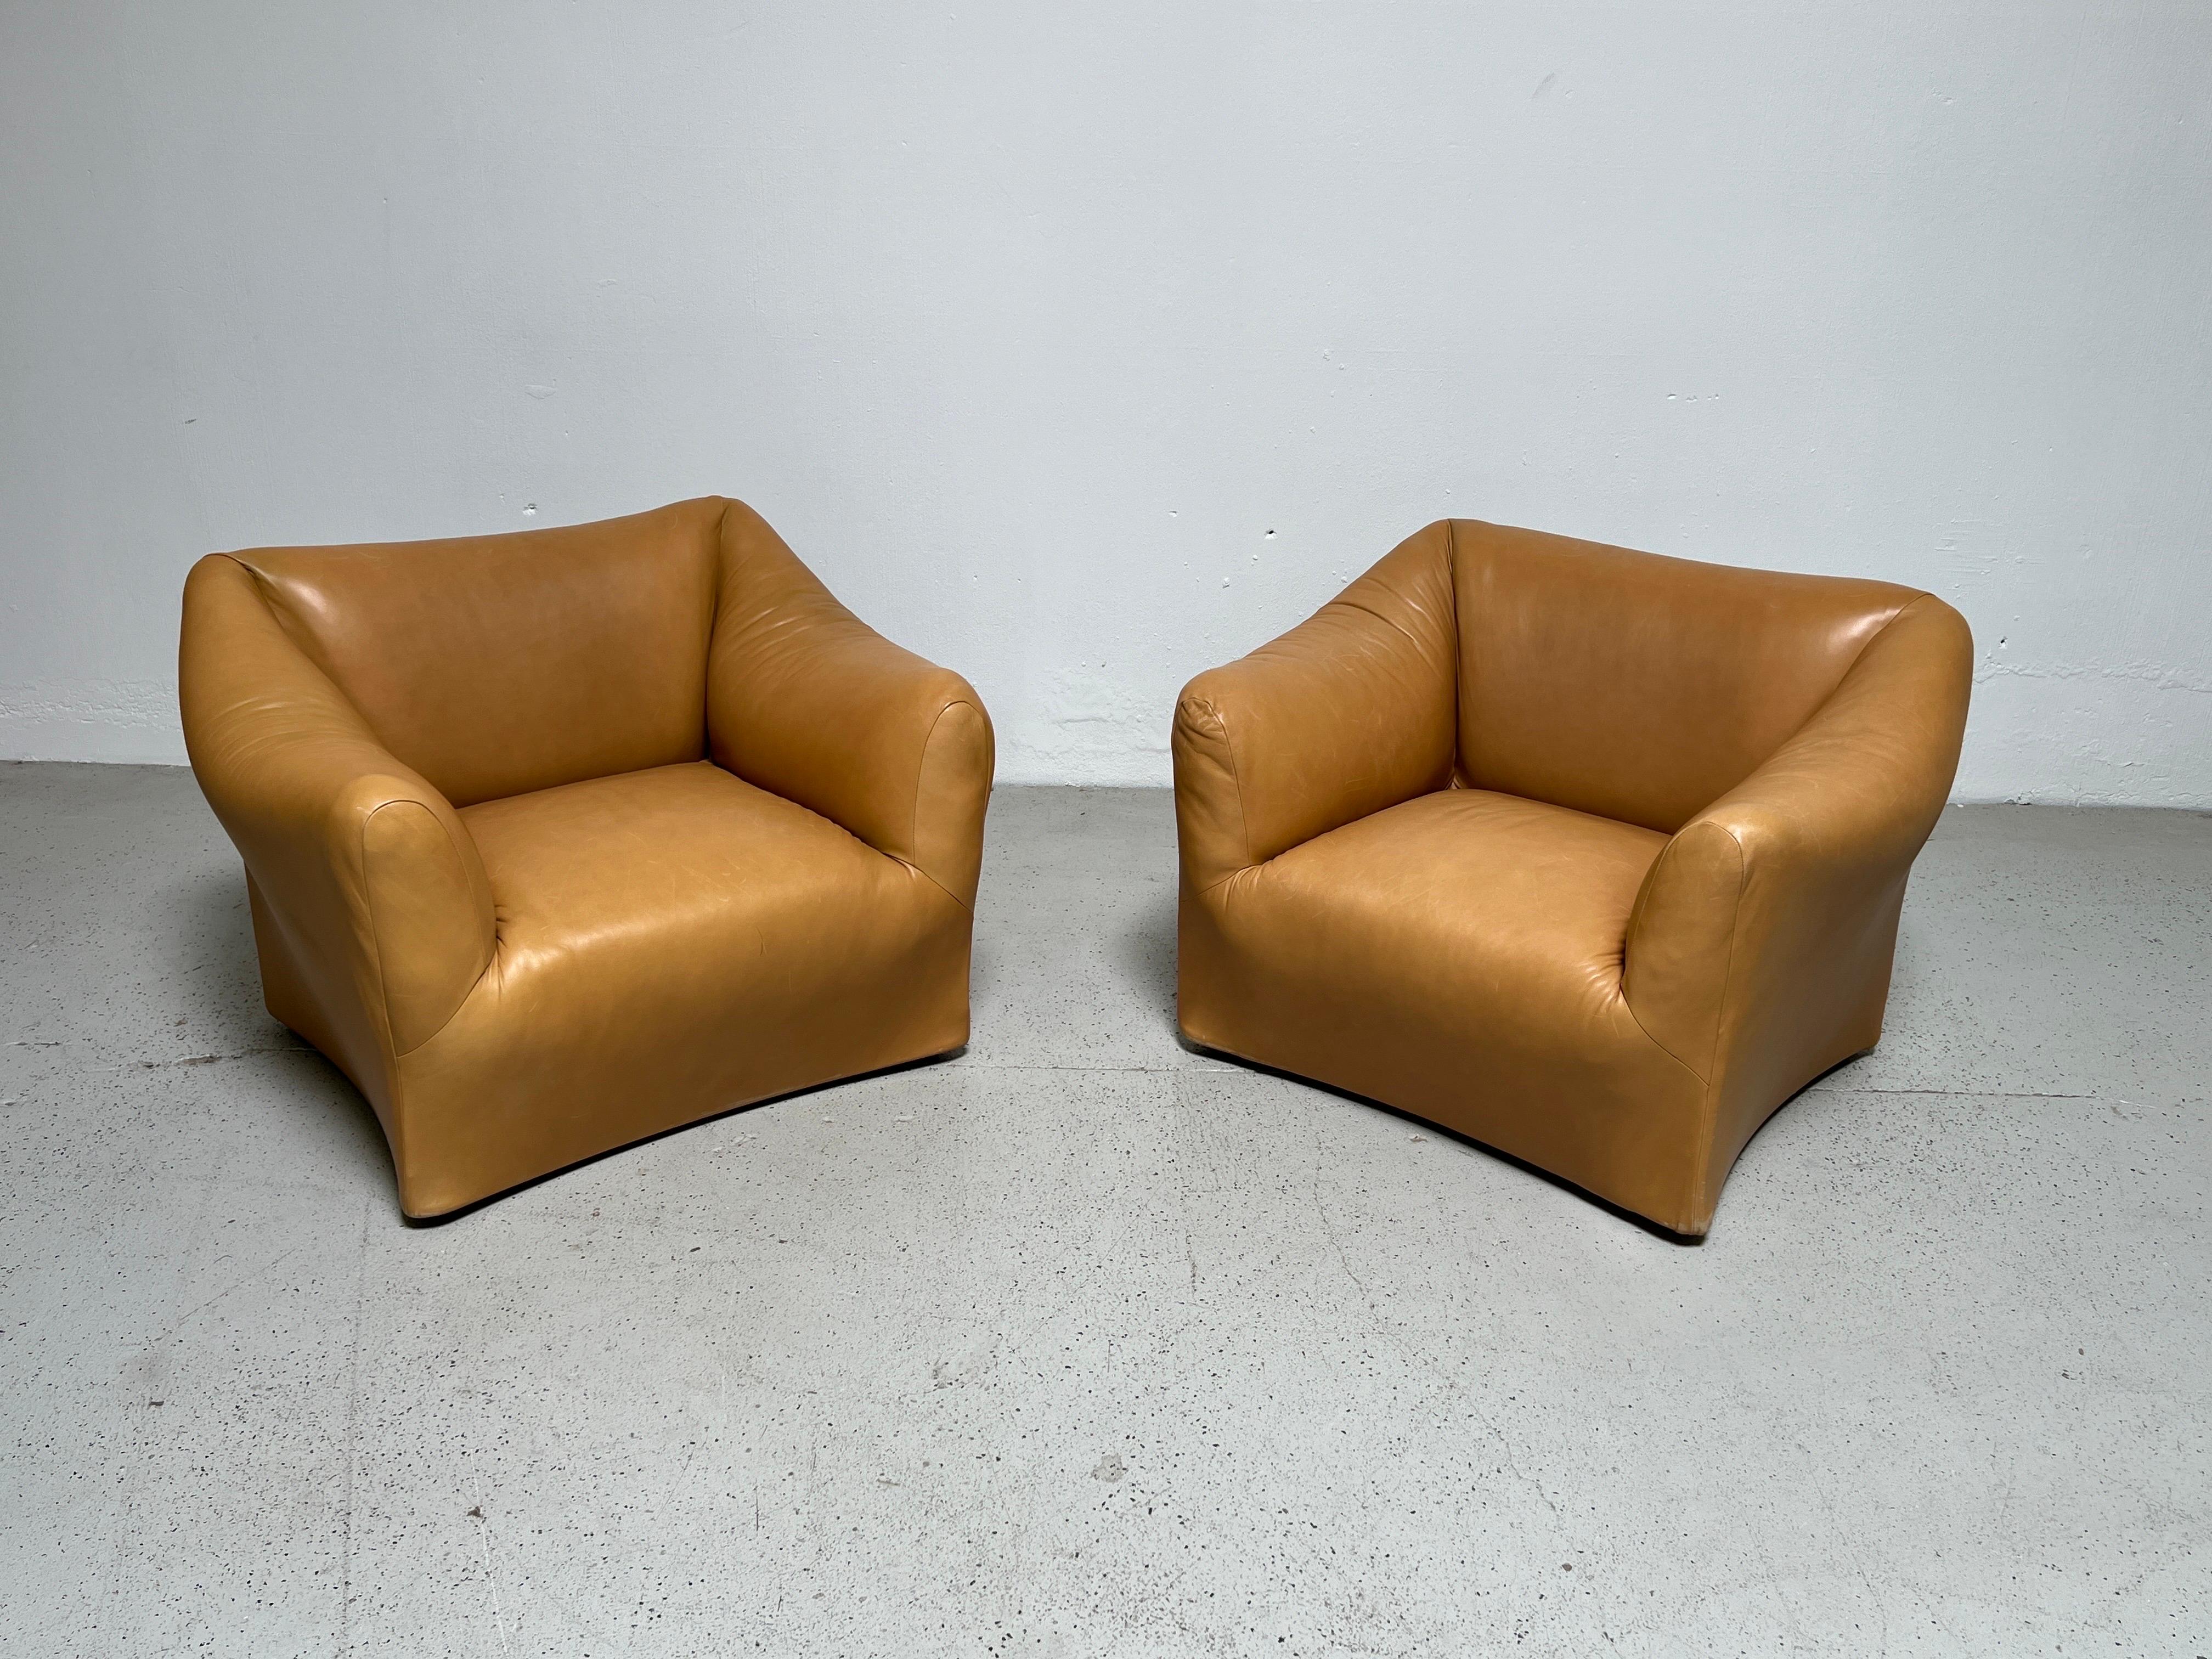 A pair of leather Tentazione lounge chairs by Mario Bellini for Cassina.